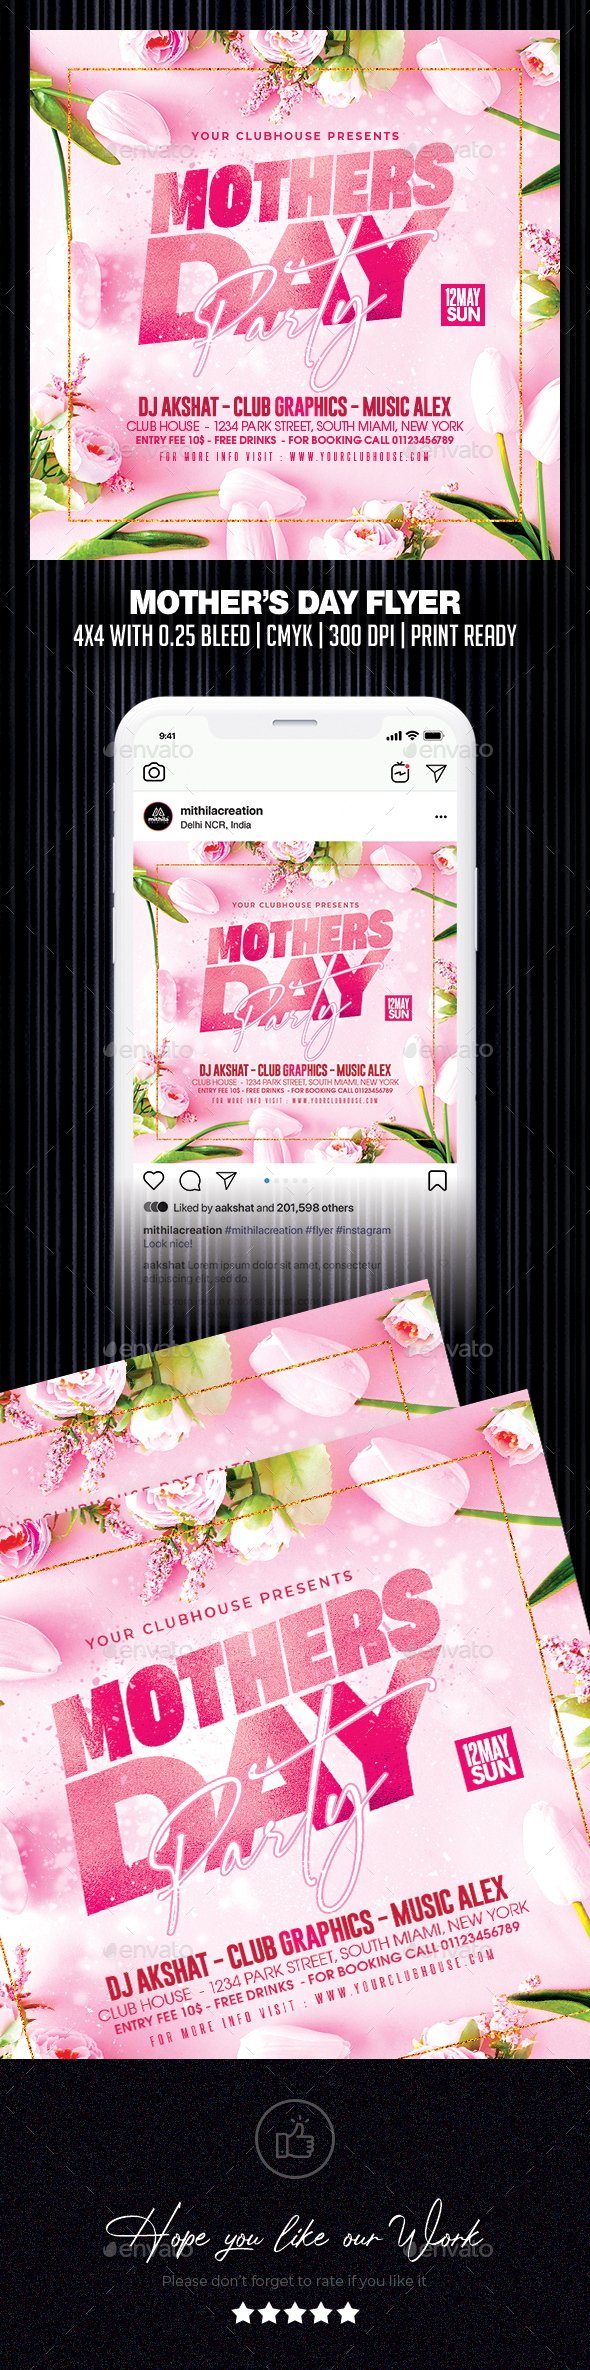 [DOWNLOAD]Mother's Day Flyer